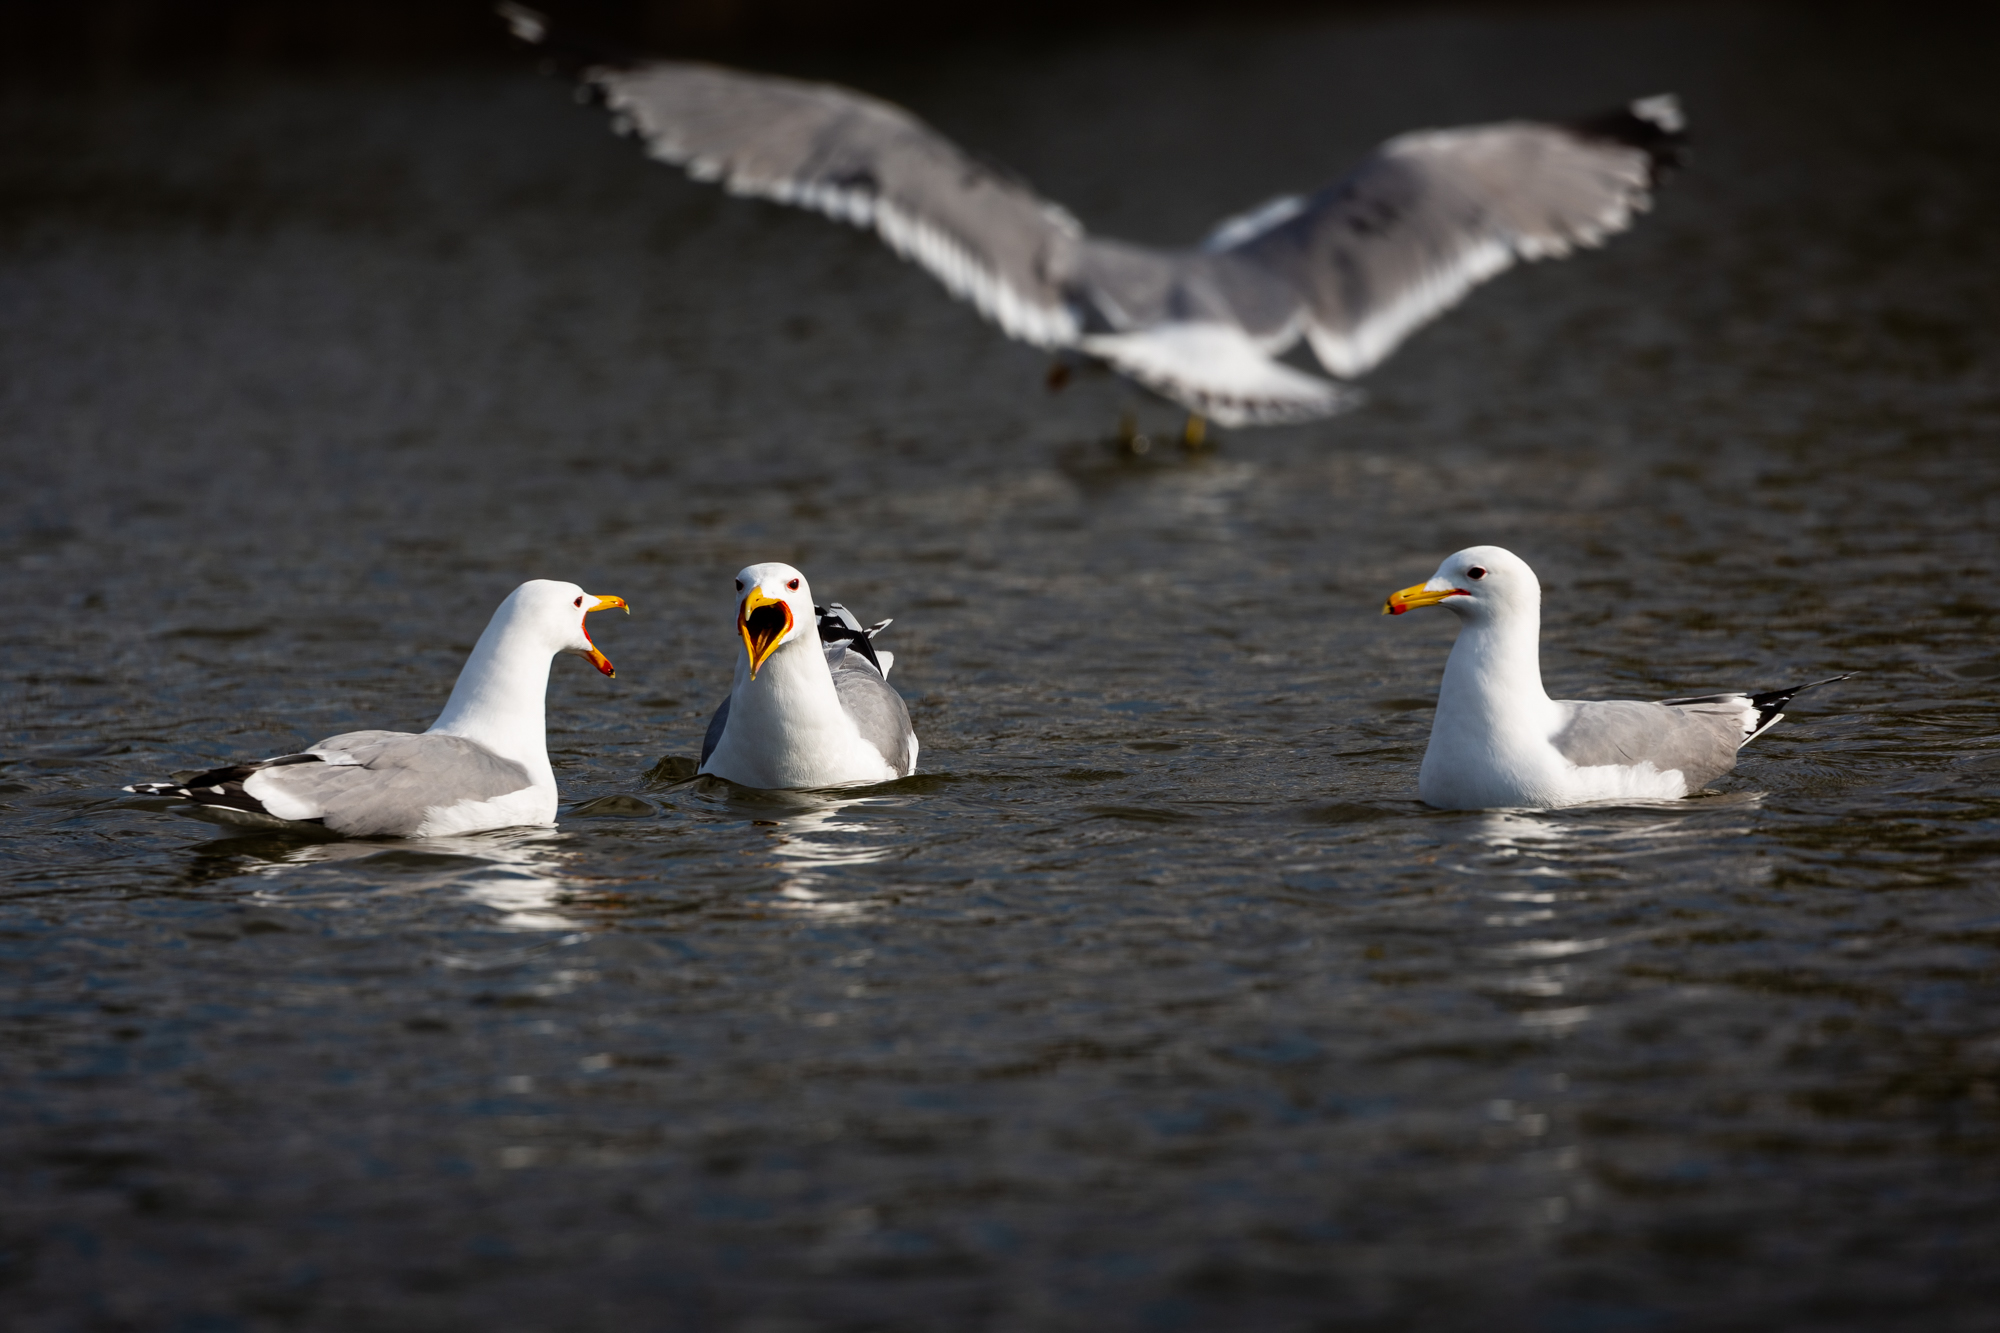 3 California Gull's in the water, facing each other. The two on the left have their beaks open. There is another gull behind them, not in focus facing the other way taking off. 